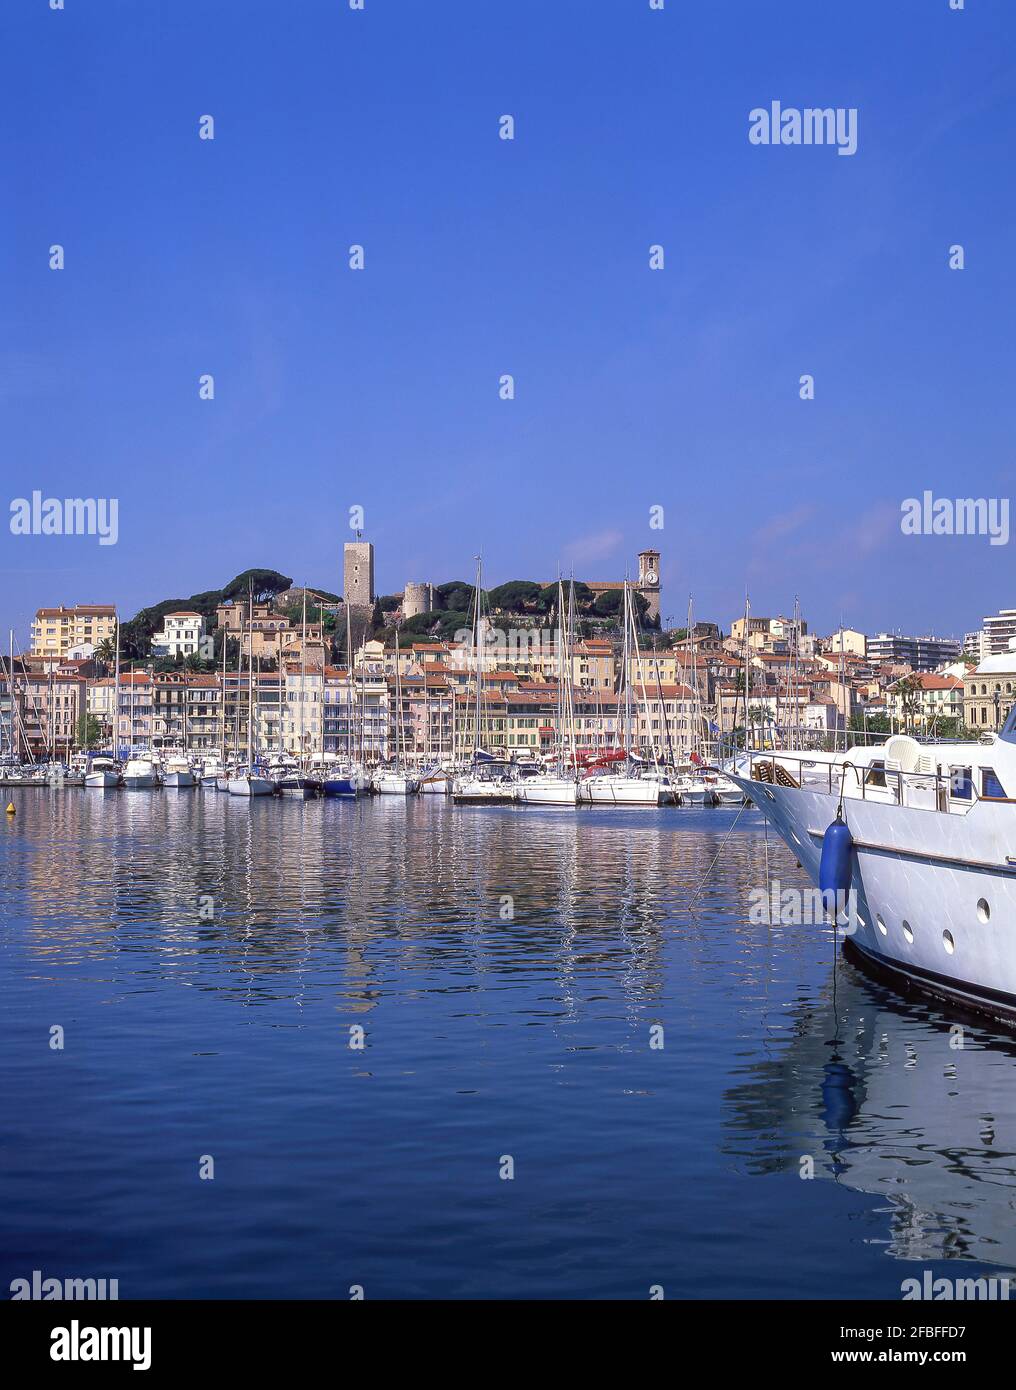 Traditional fishing boats in Old Harbour, Cannes, Côte d'Azur, Alpes-Maritimes, Provence-Alpes-Côte d'Azur, France Stock Photo